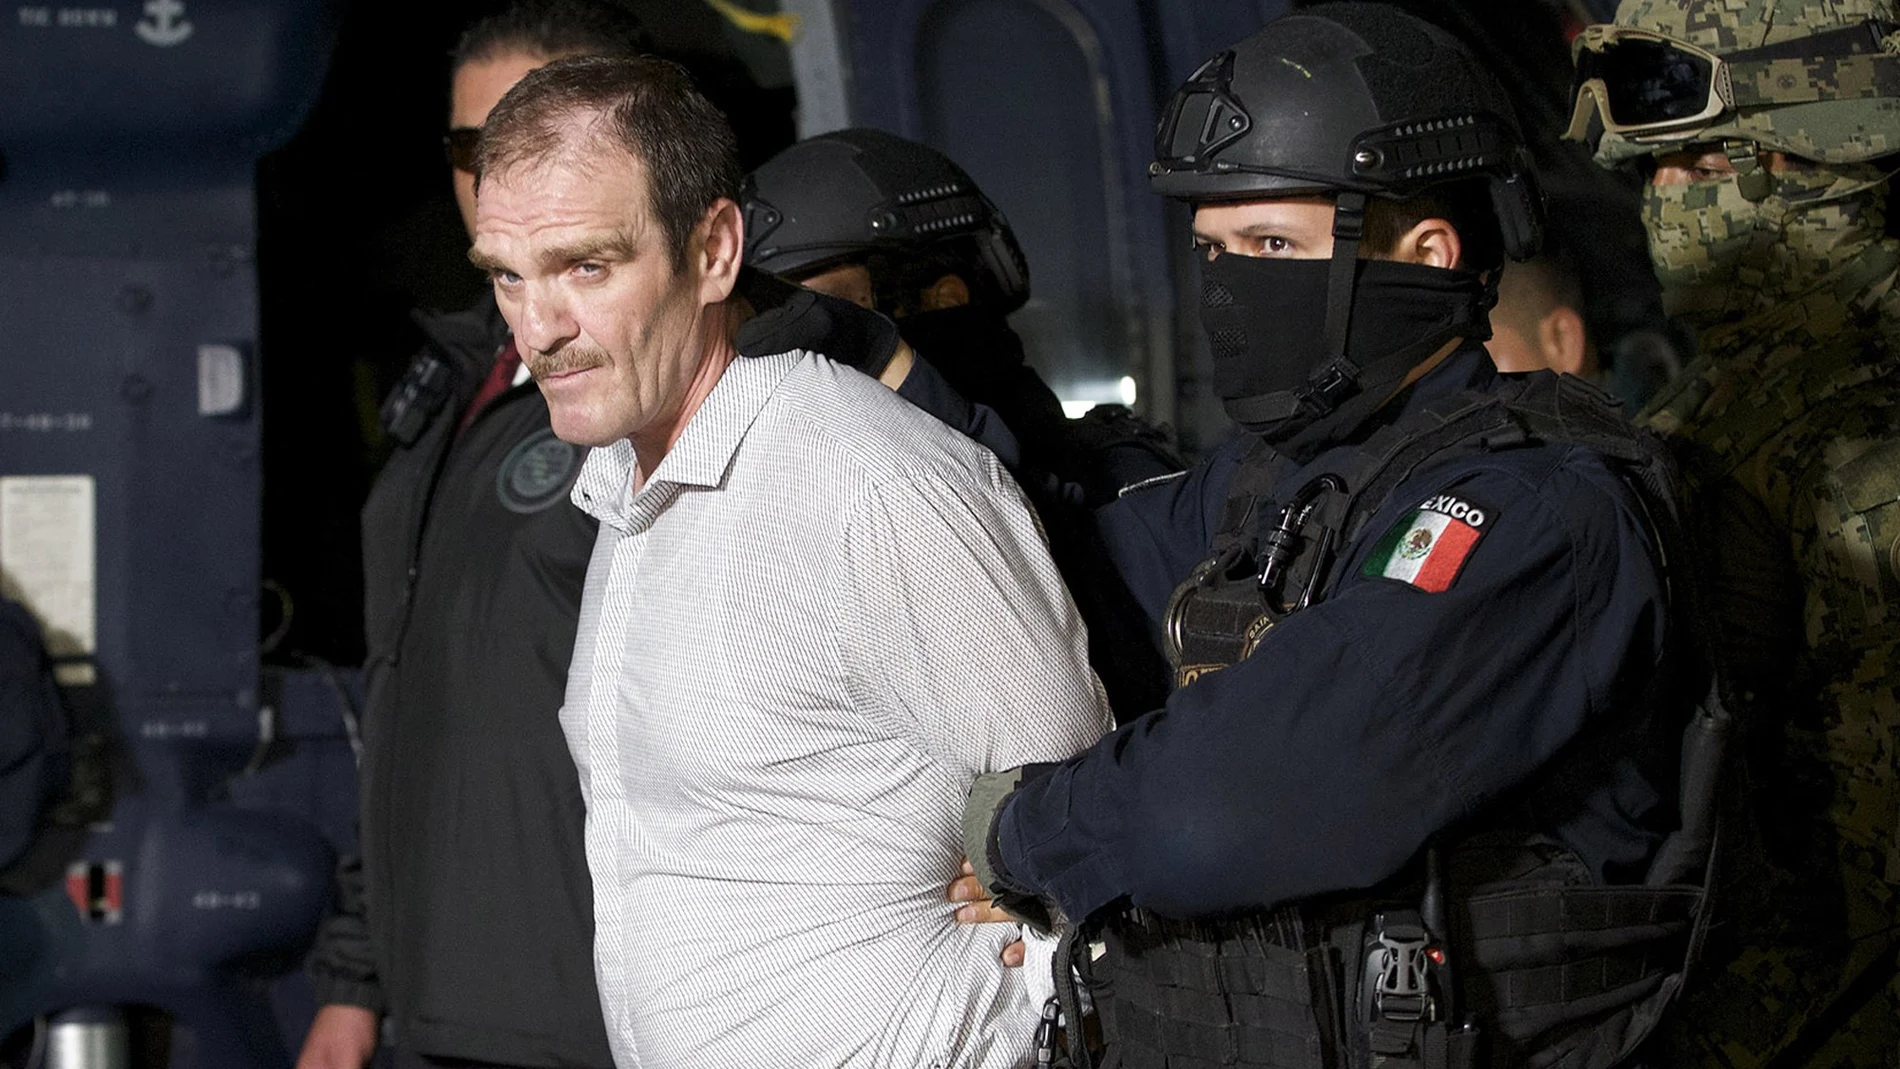 FILE - In this June 15, 2016 file photo provided by the Mexican Attorney General's Office, Hector "El Guero" Palma, is escorted in handcuffs from a helicopter at a federal hanger in Mexico City. An appeals court on Tuesday, July 13, 2021, in Mexico, has overturned PalmaÂ´s acquittal, and was taken to the countryÂ´s maximum security Altiplano prison after the ruling. (Mexico's Attorney General's Office via AP, File)